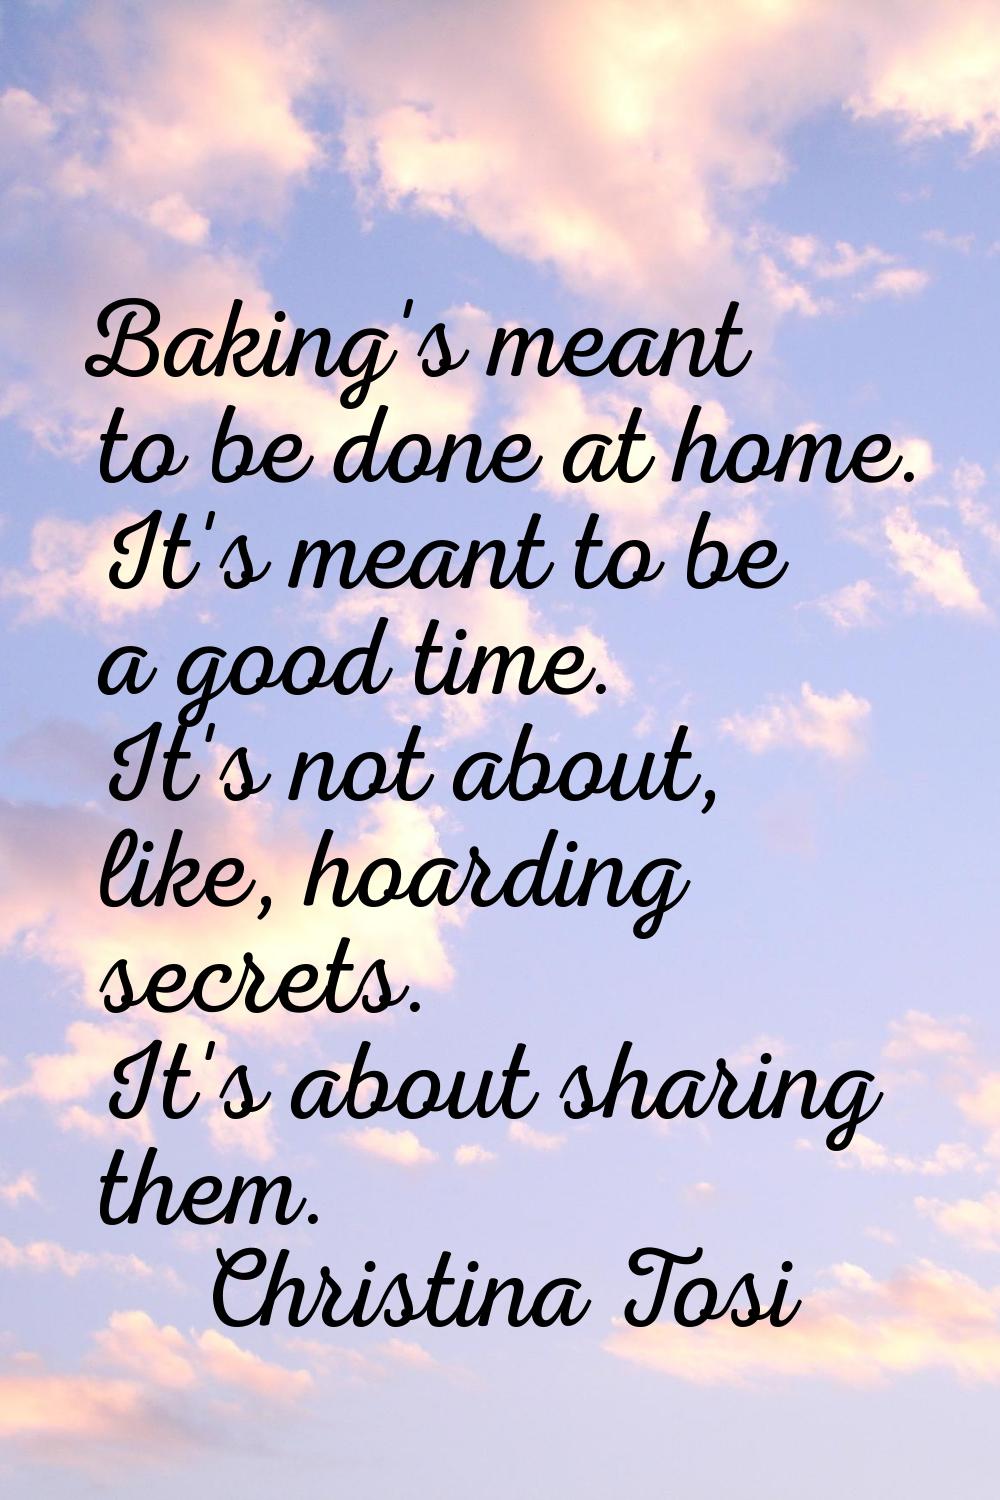 Baking's meant to be done at home. It's meant to be a good time. It's not about, like, hoarding sec